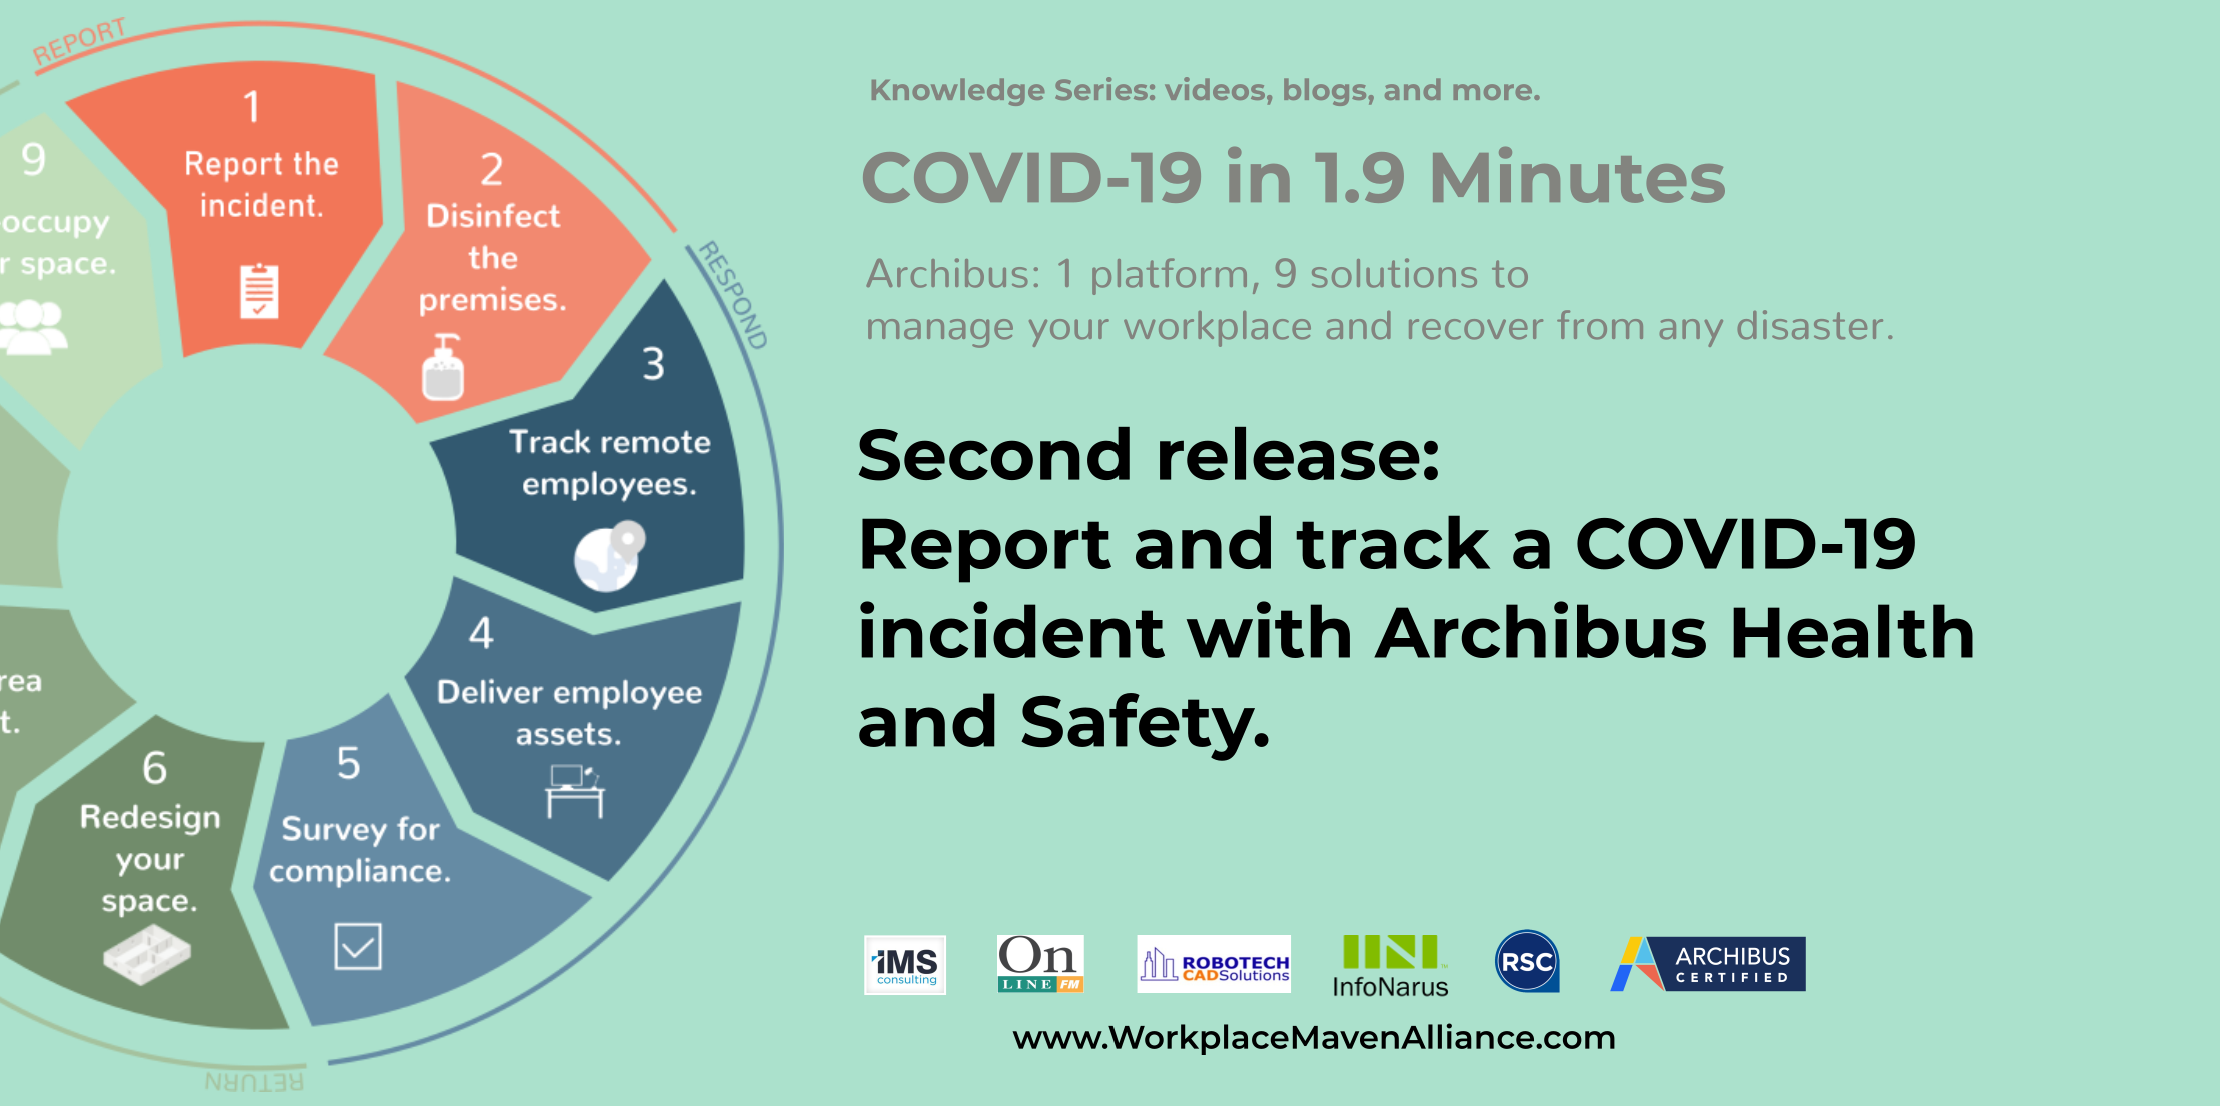 COVID-19 in 1.9 Minutes: how to track and contain incidents with Archibus Health and Safety